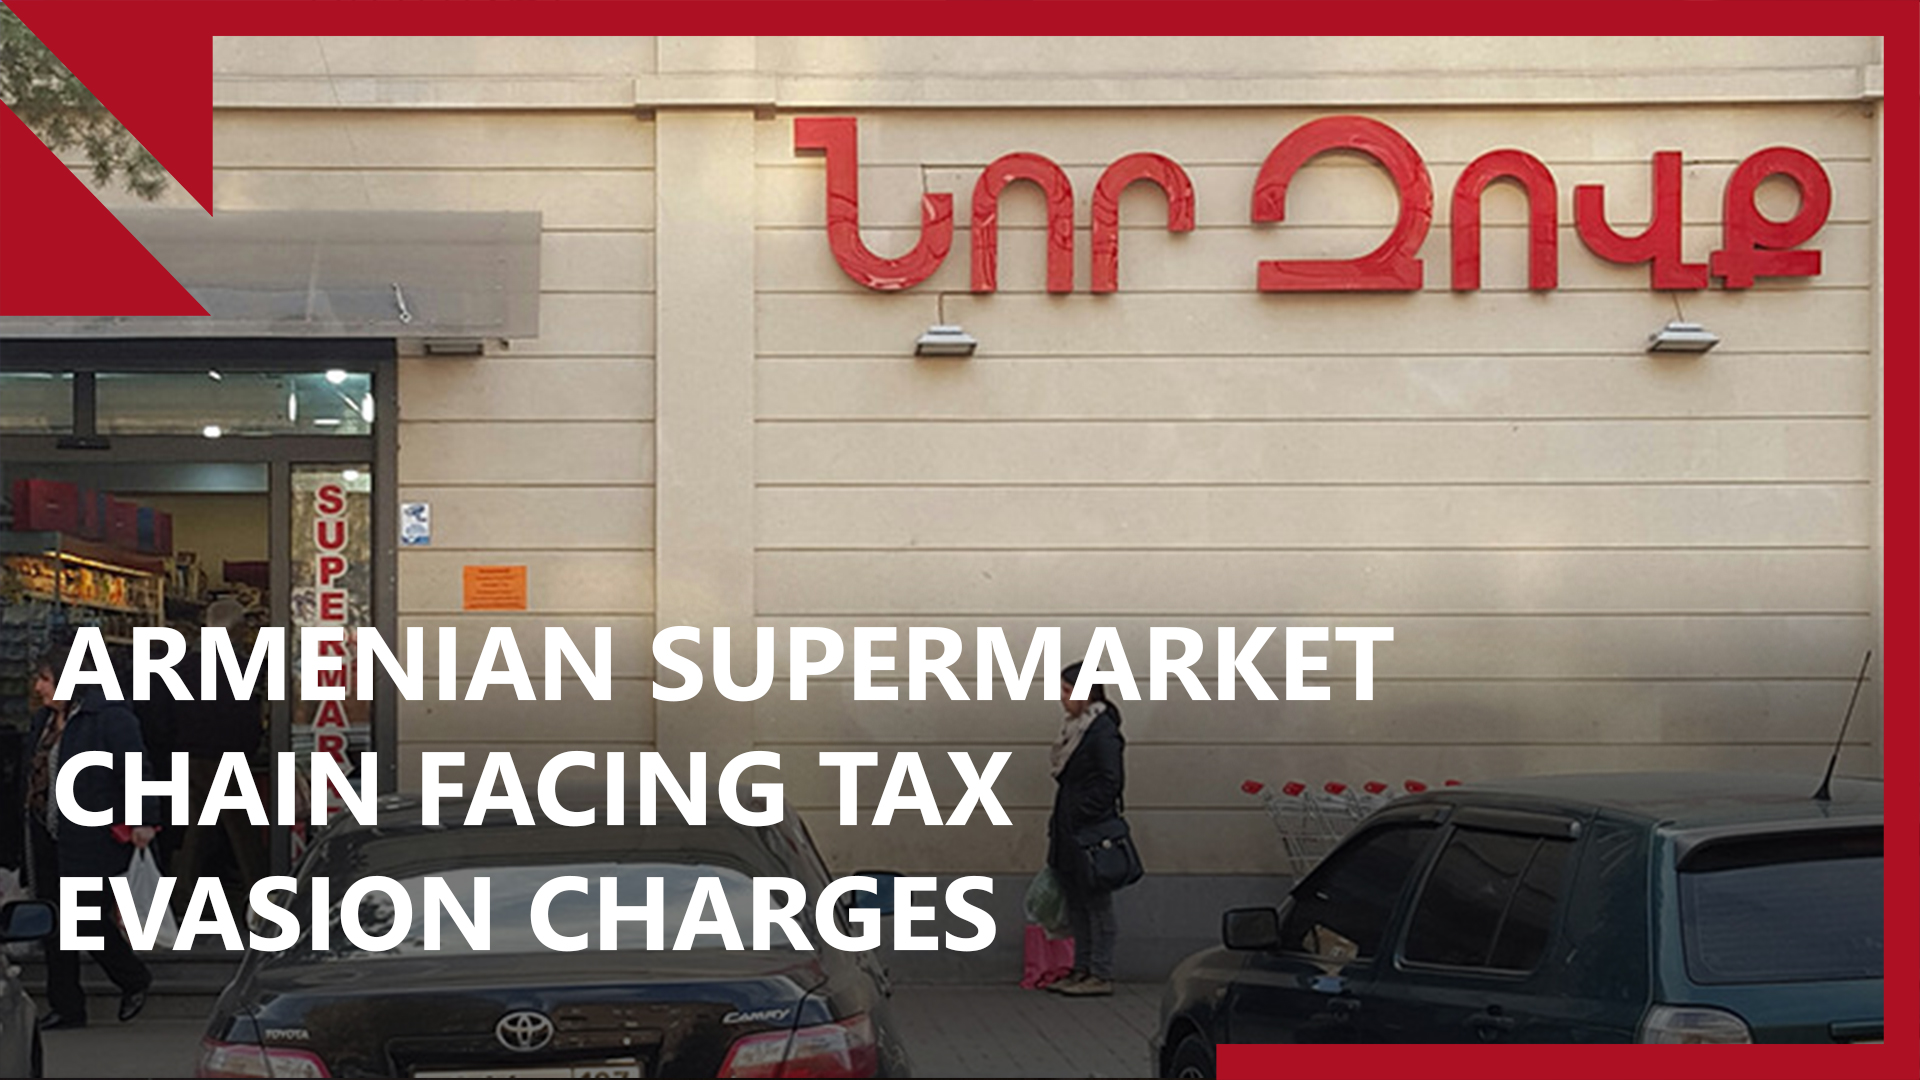 Business Week Armenia: Nor Zovq supermarket chain heads charged with tax evasion